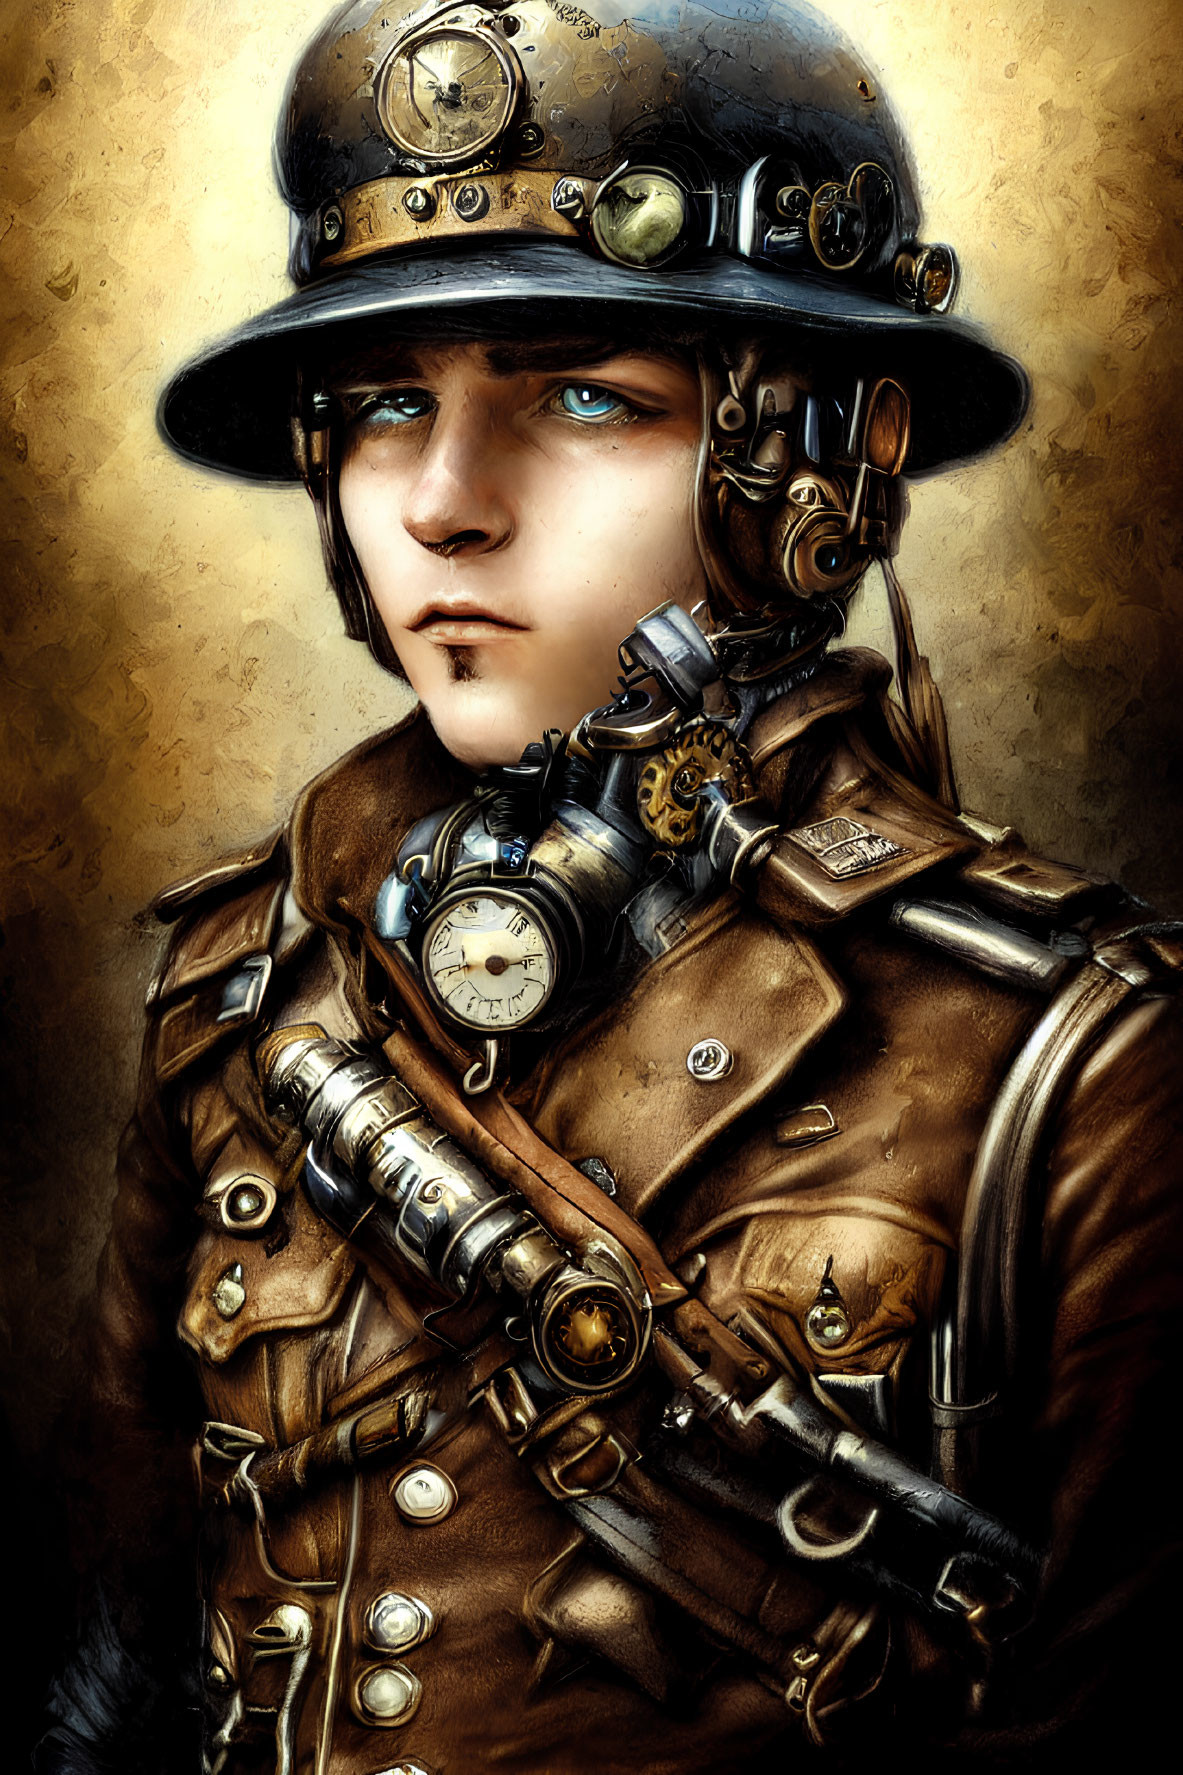 Steampunk-inspired portrait of person with blue eyes in gear-adorned helmet and brass-fitted